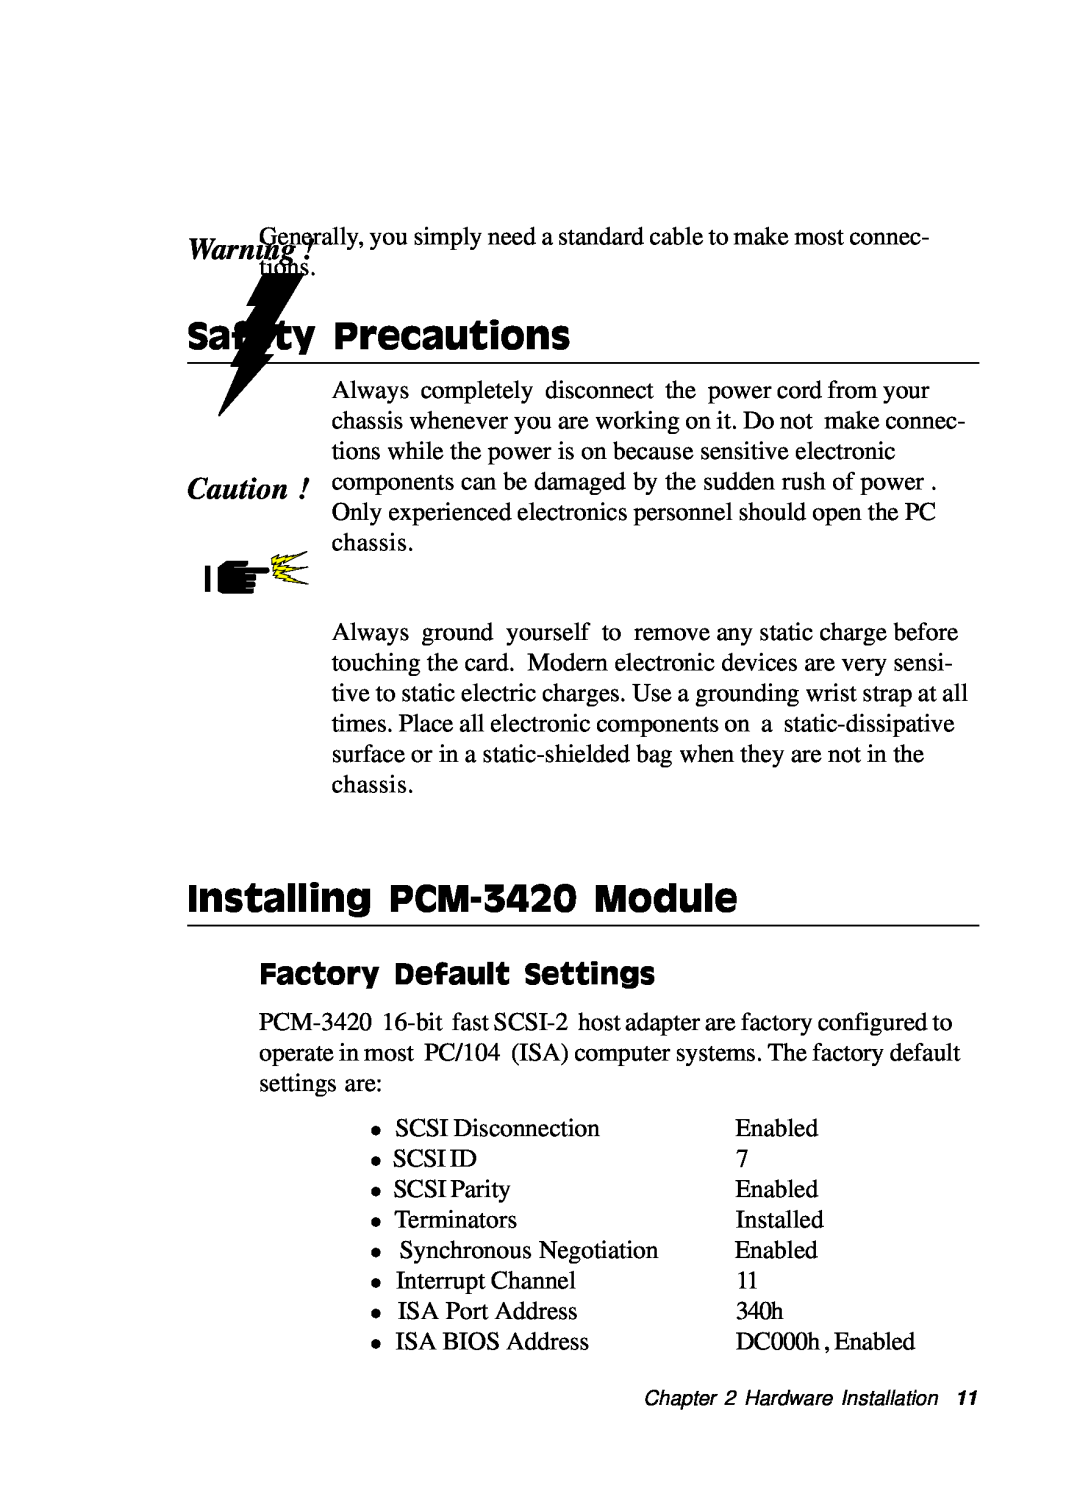 Adaptec PC/104 manual Safety Precautions, Installing PCM-3420 Module, Factory Default Settings 